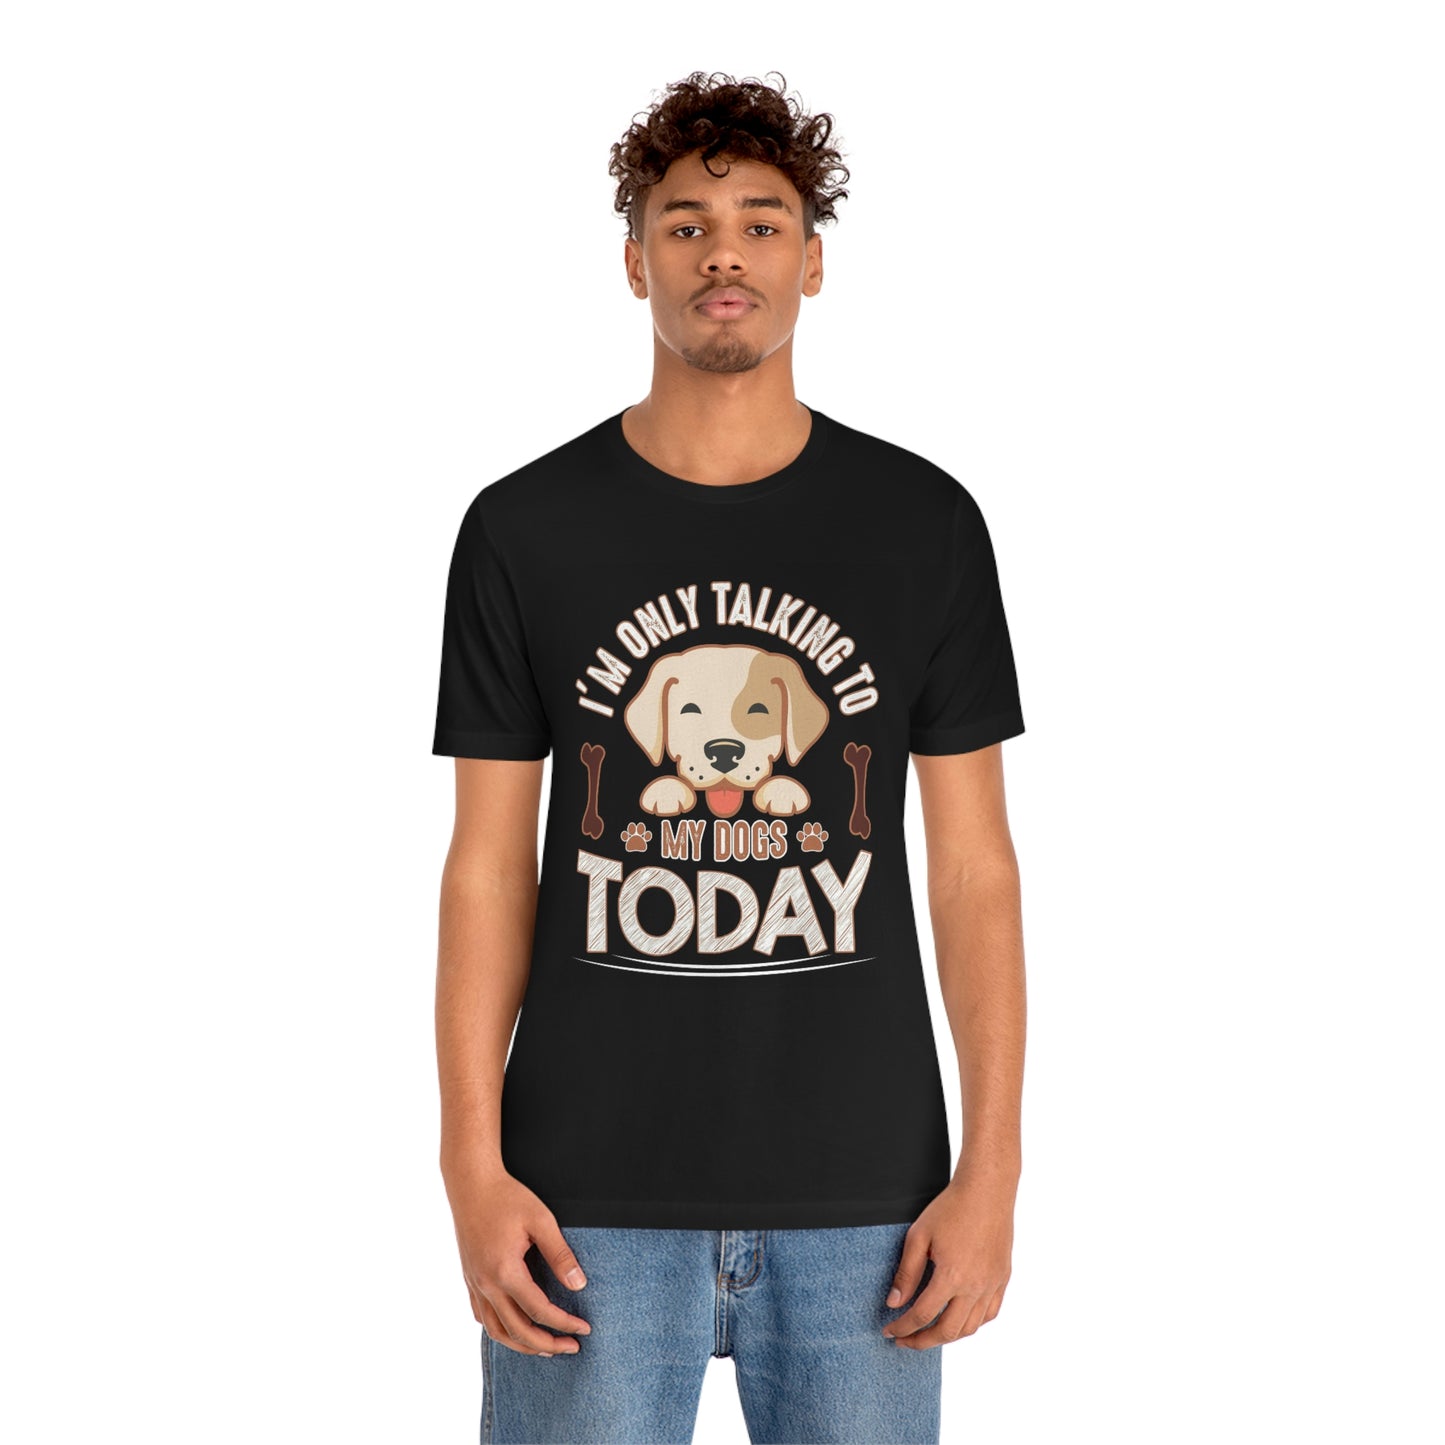 Only talking to dog- Jersey Short Sleeve Tee